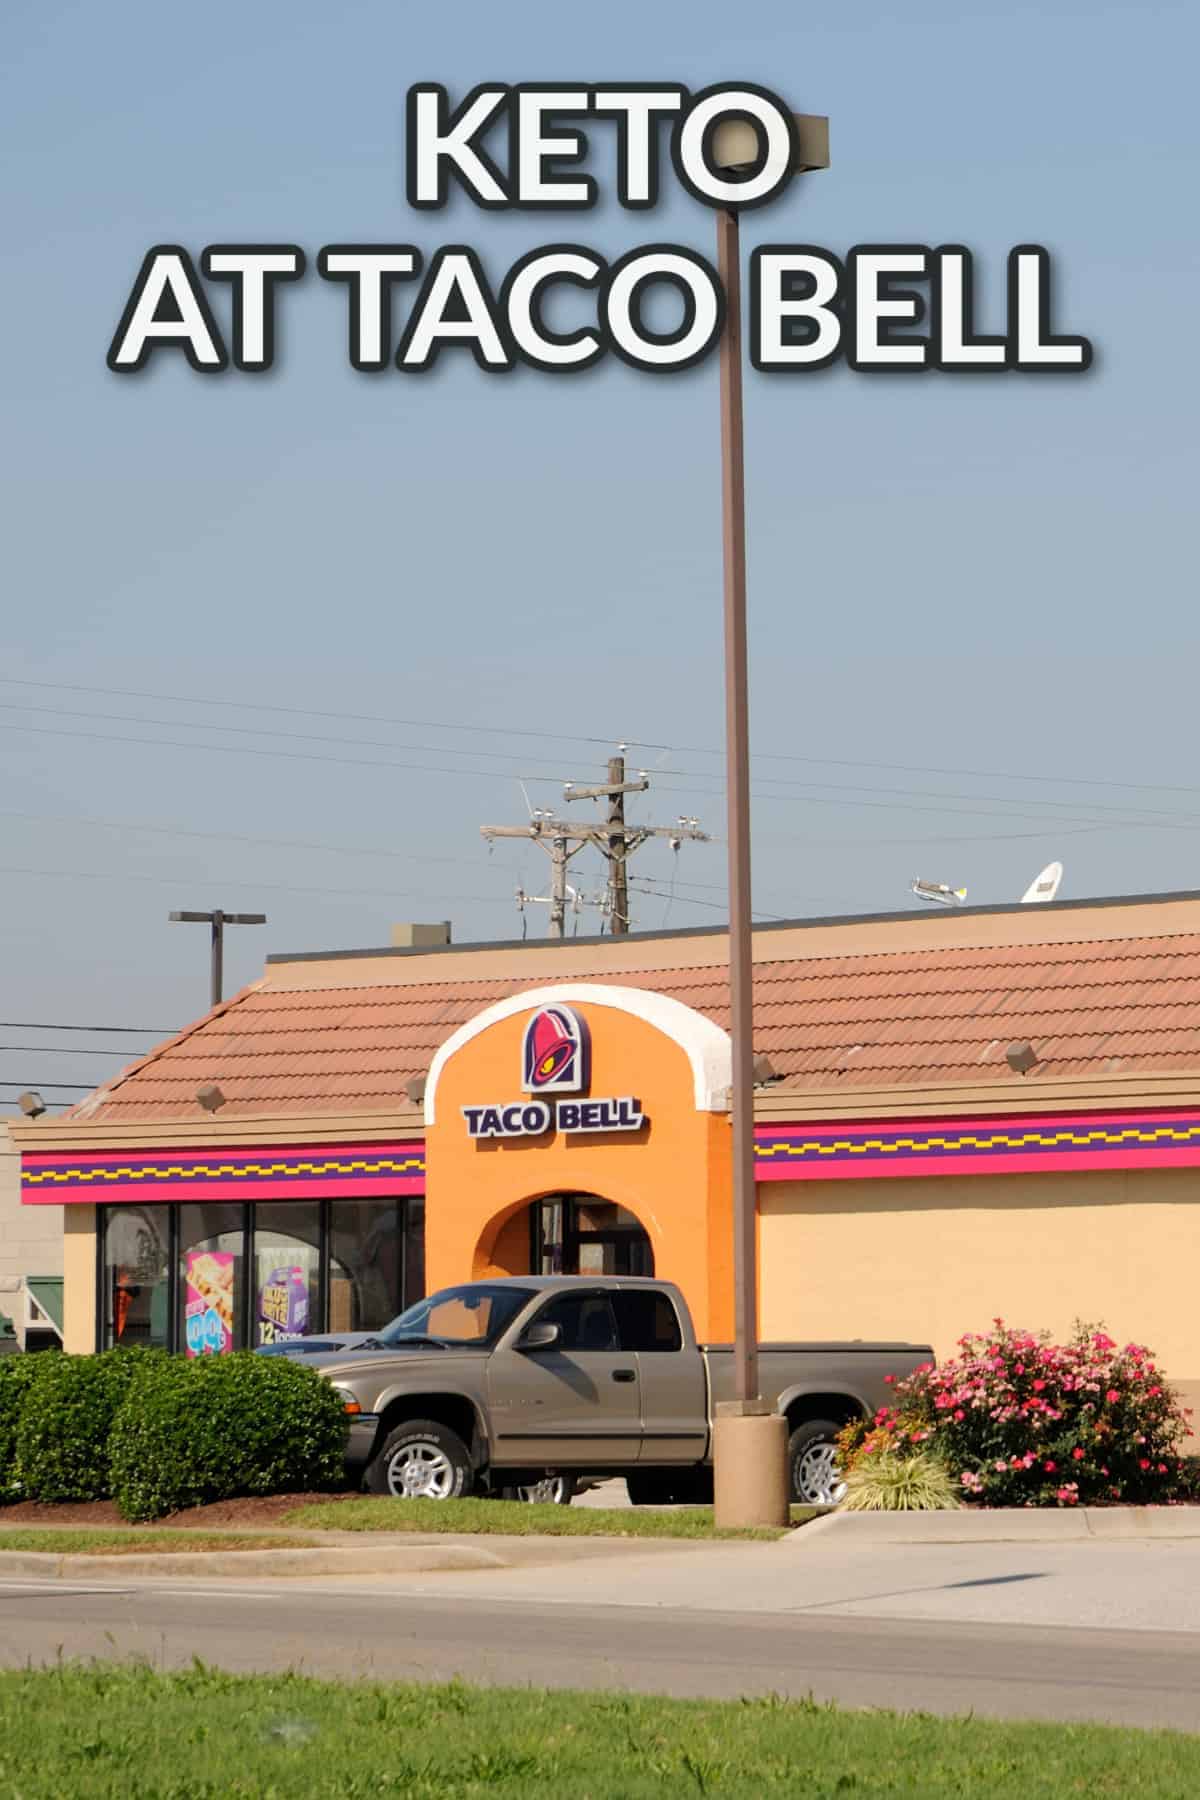 keto at taco bell with text overlay.